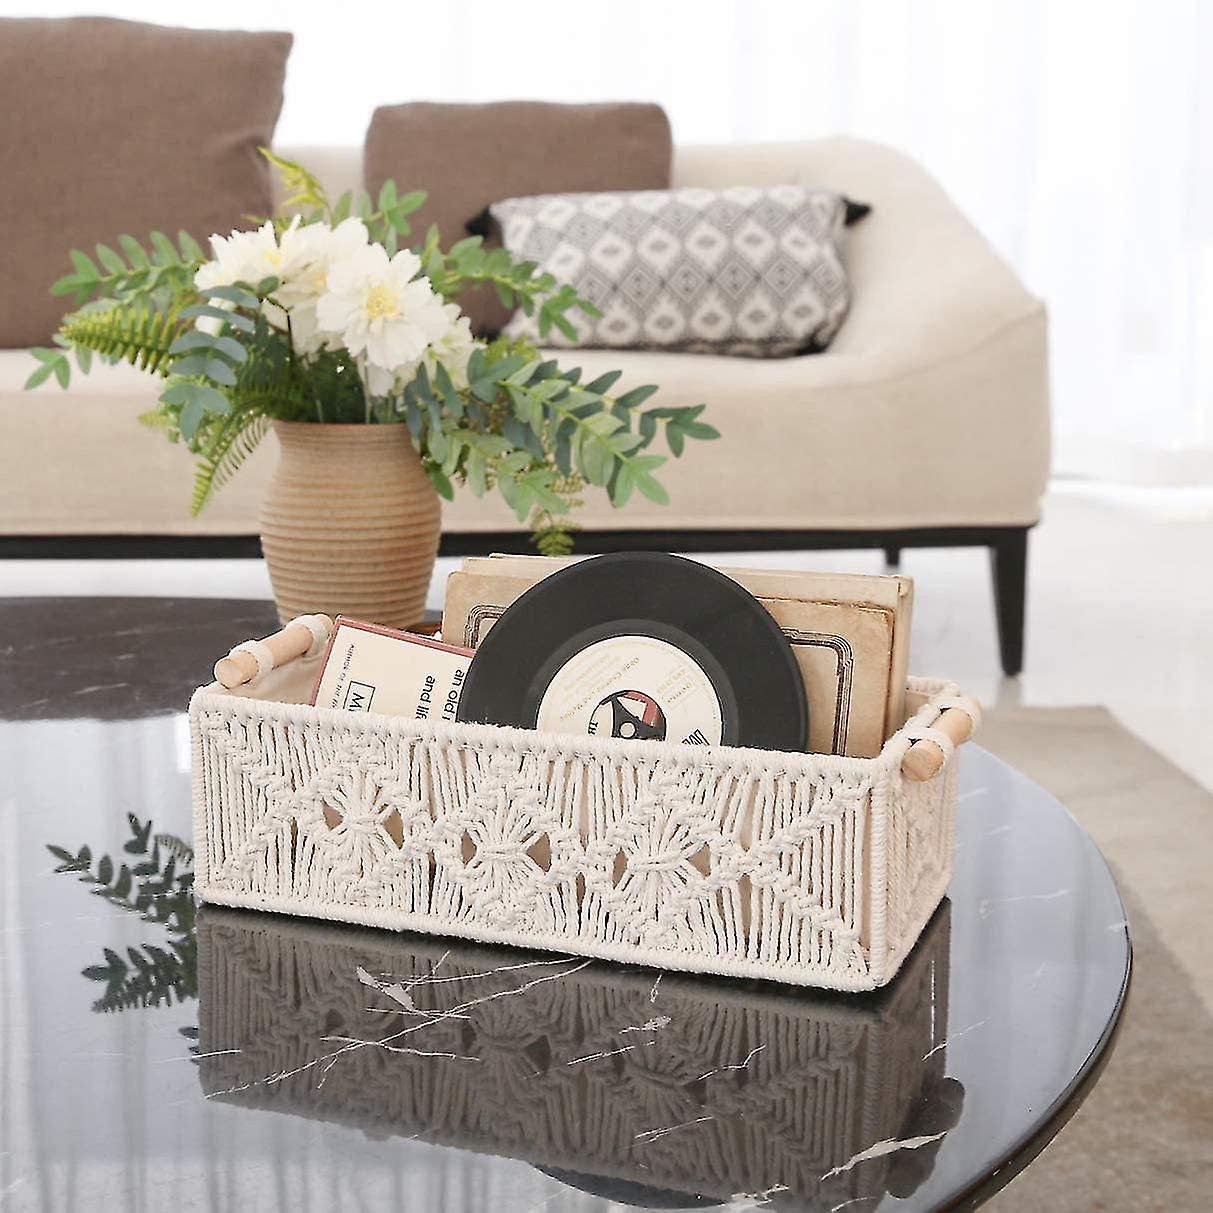 Boho basket with vinyl records on coffee table.